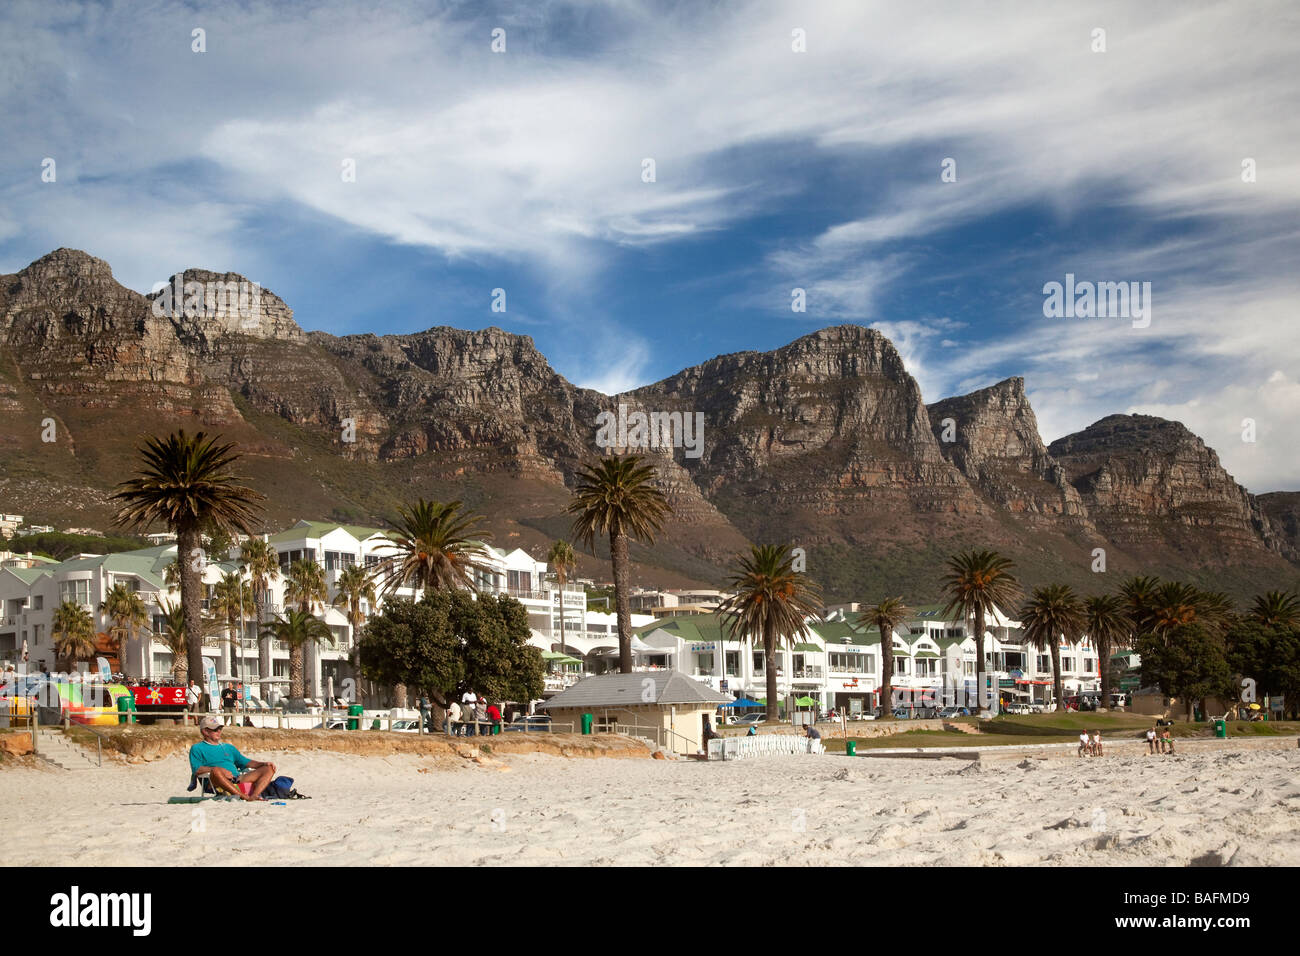 Man on beach, Cape Town, South Africa Stock Photo